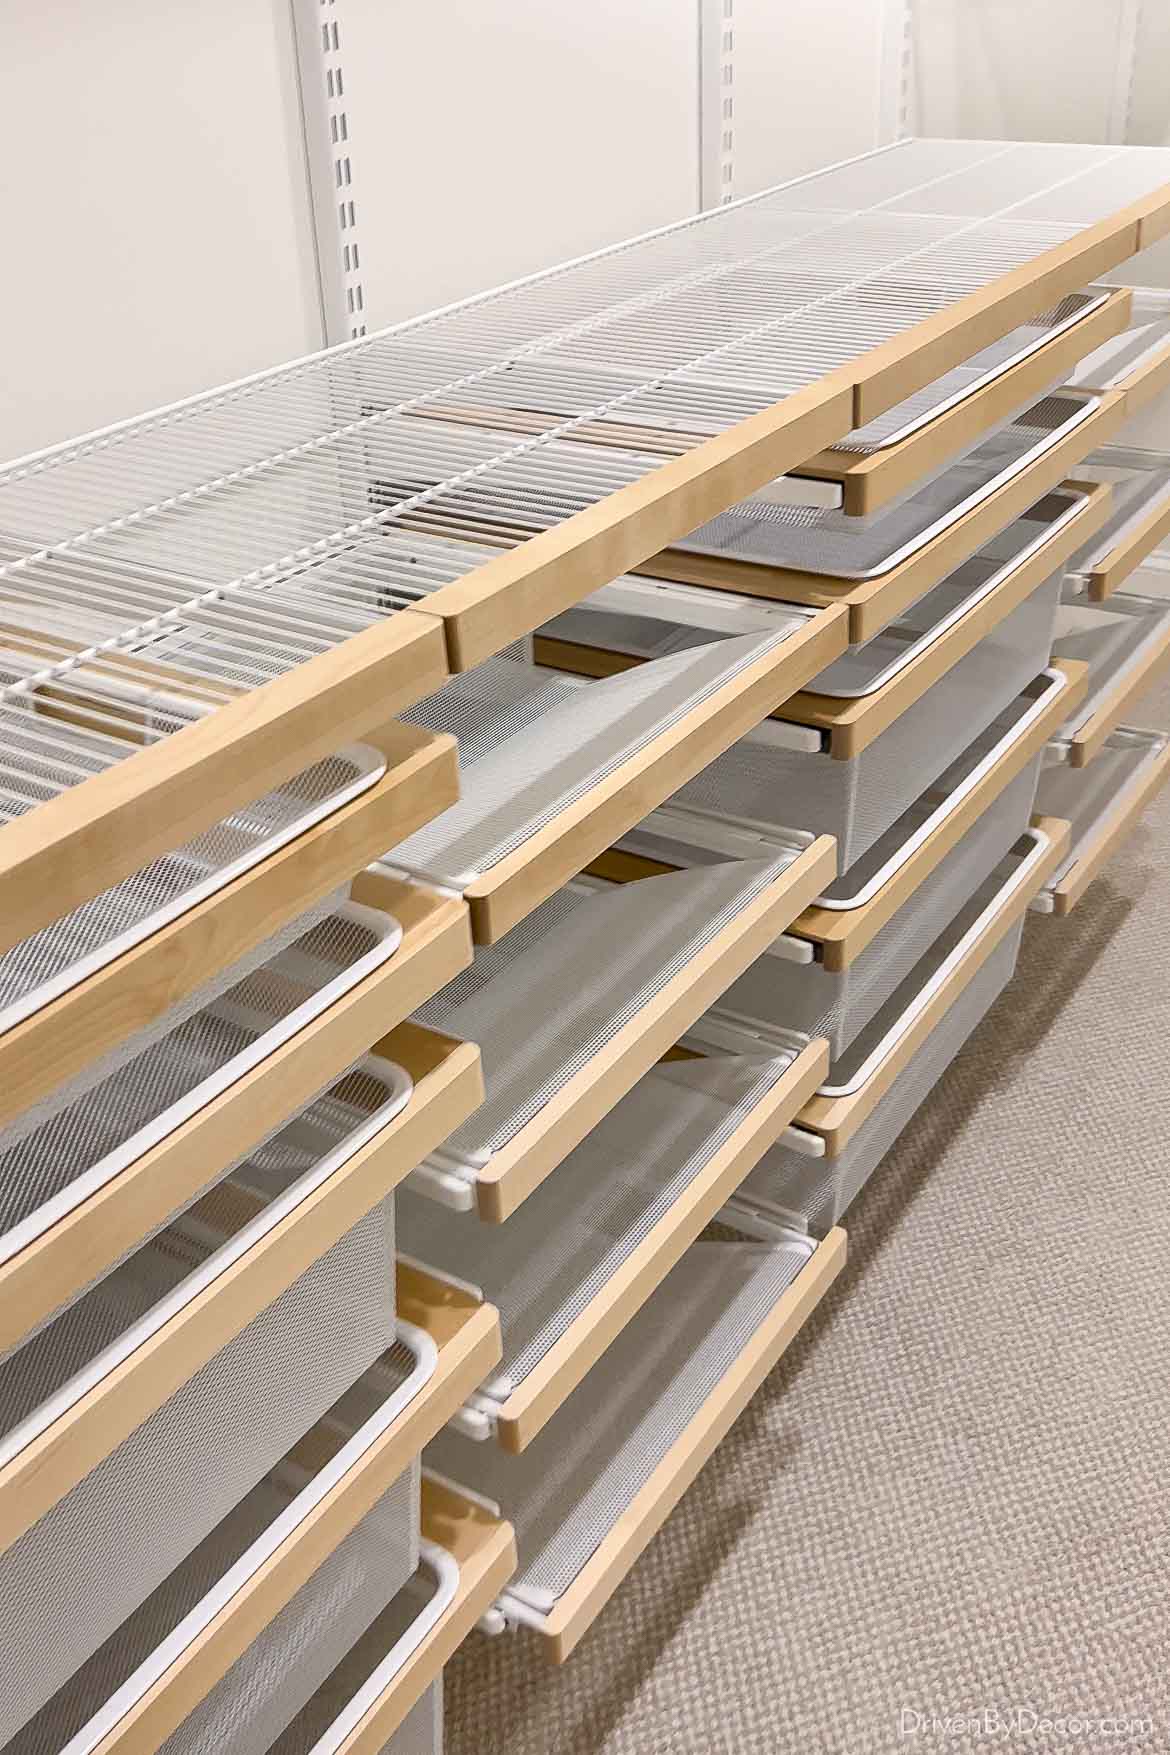 The drawers in our new Elfa closet system